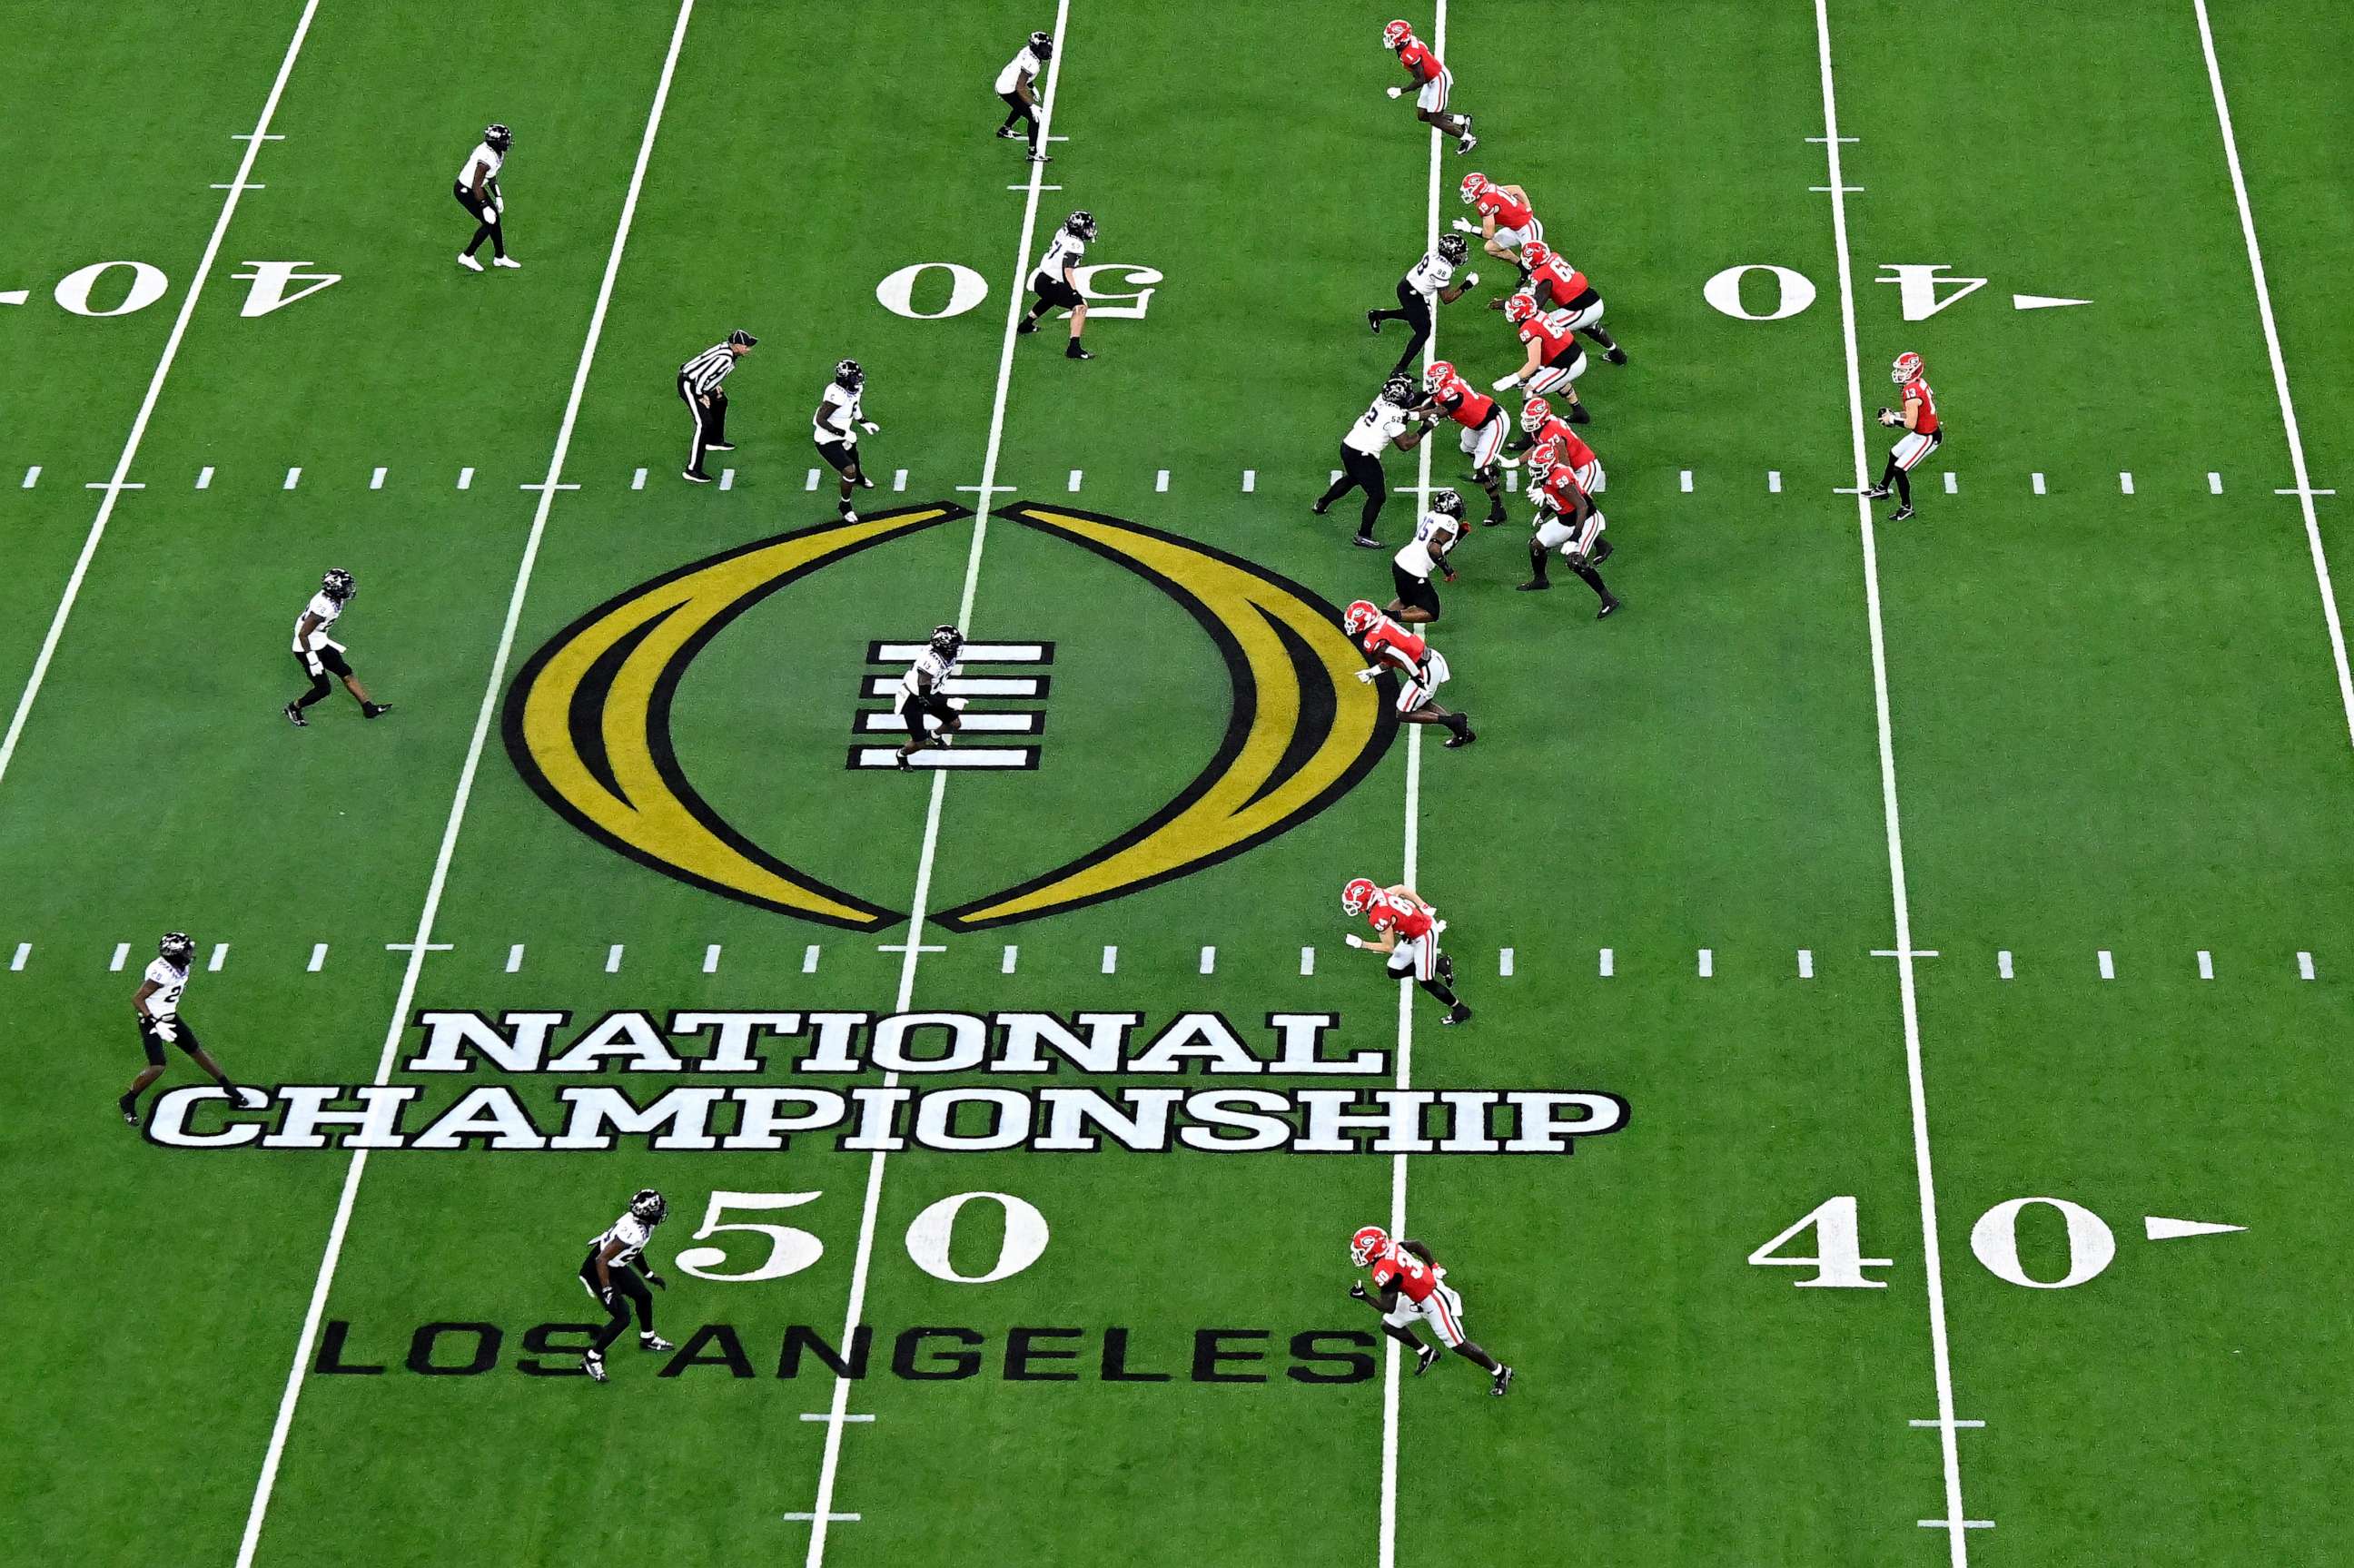 PHOTO: INGLEWOOD, CALIFORNIA - JANUARY 09: A view of the National Championship logo on the field as the Georgia Bulldogs run a play against the TCU Horned Frogs in the College Football Playoff National Championship game at SoFi Stadium on Jan. 9, 2023.